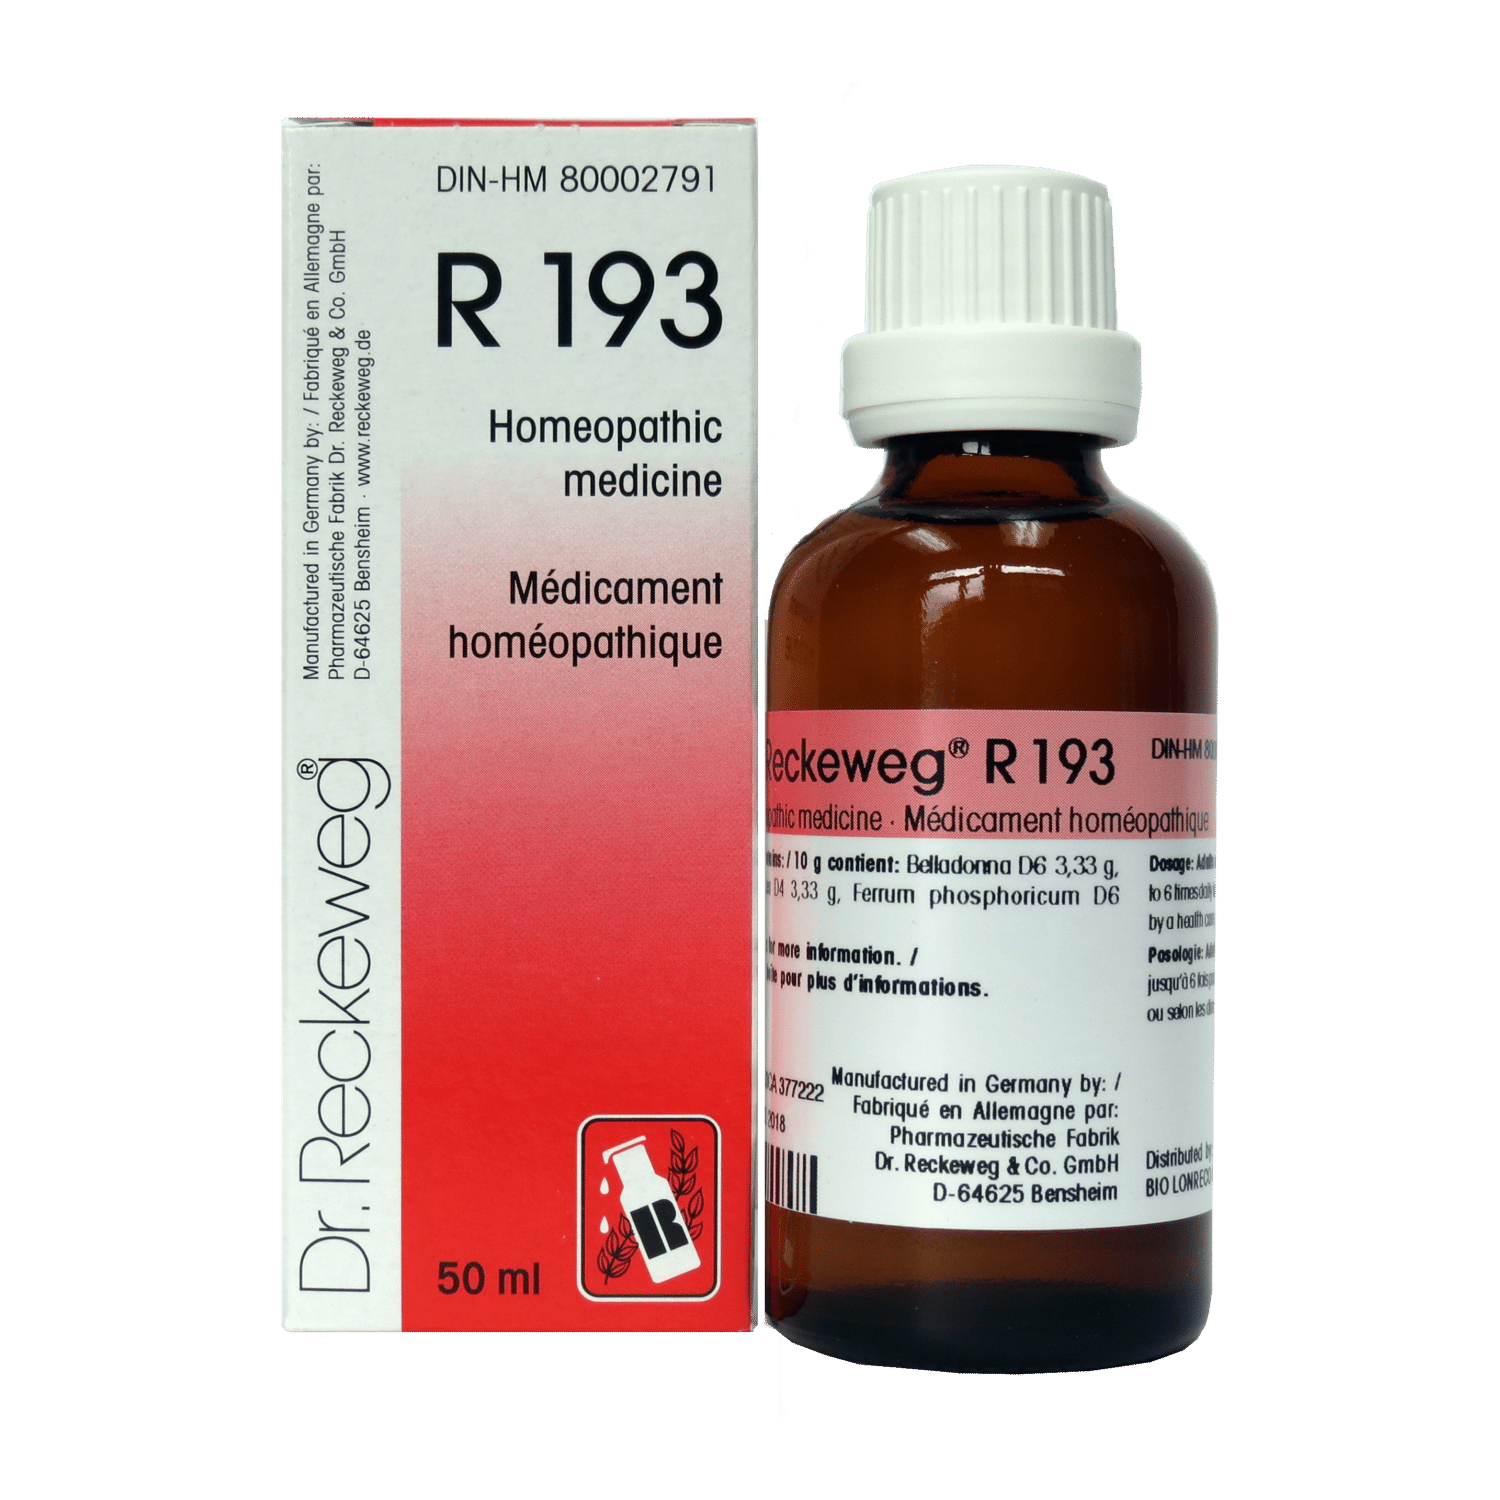 R193 Intense fever, inflammation, Homeopathic medicine 50 ml